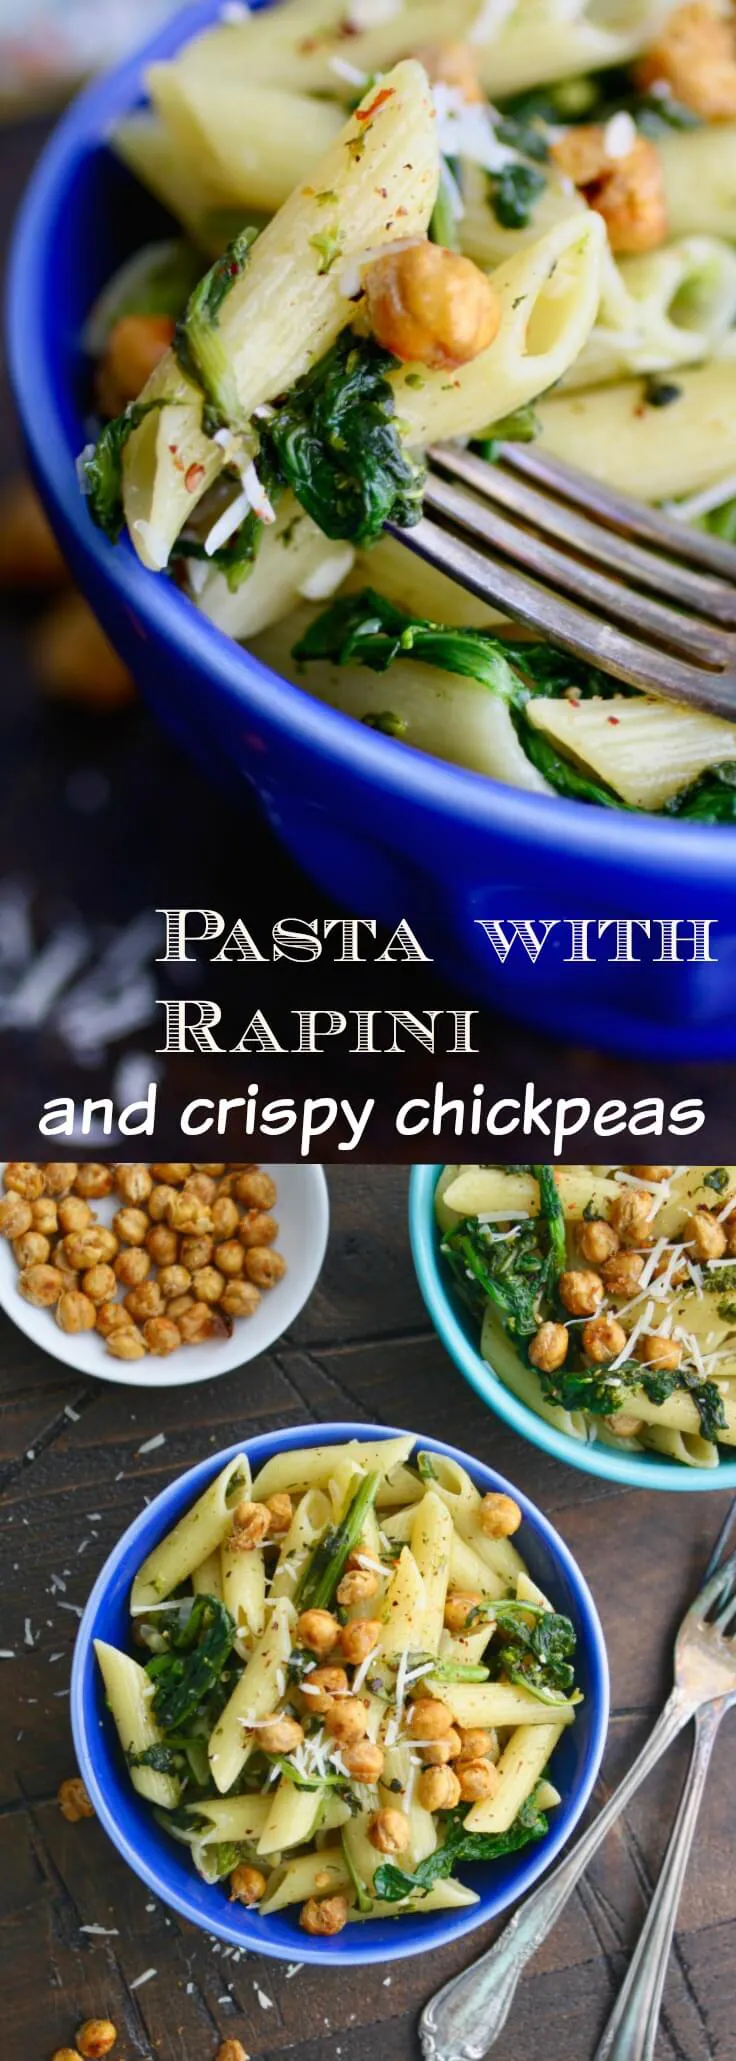 Your next meal could be fabulous! Try this recipe for Pasta with Rapini and Crispy Chickpeas!